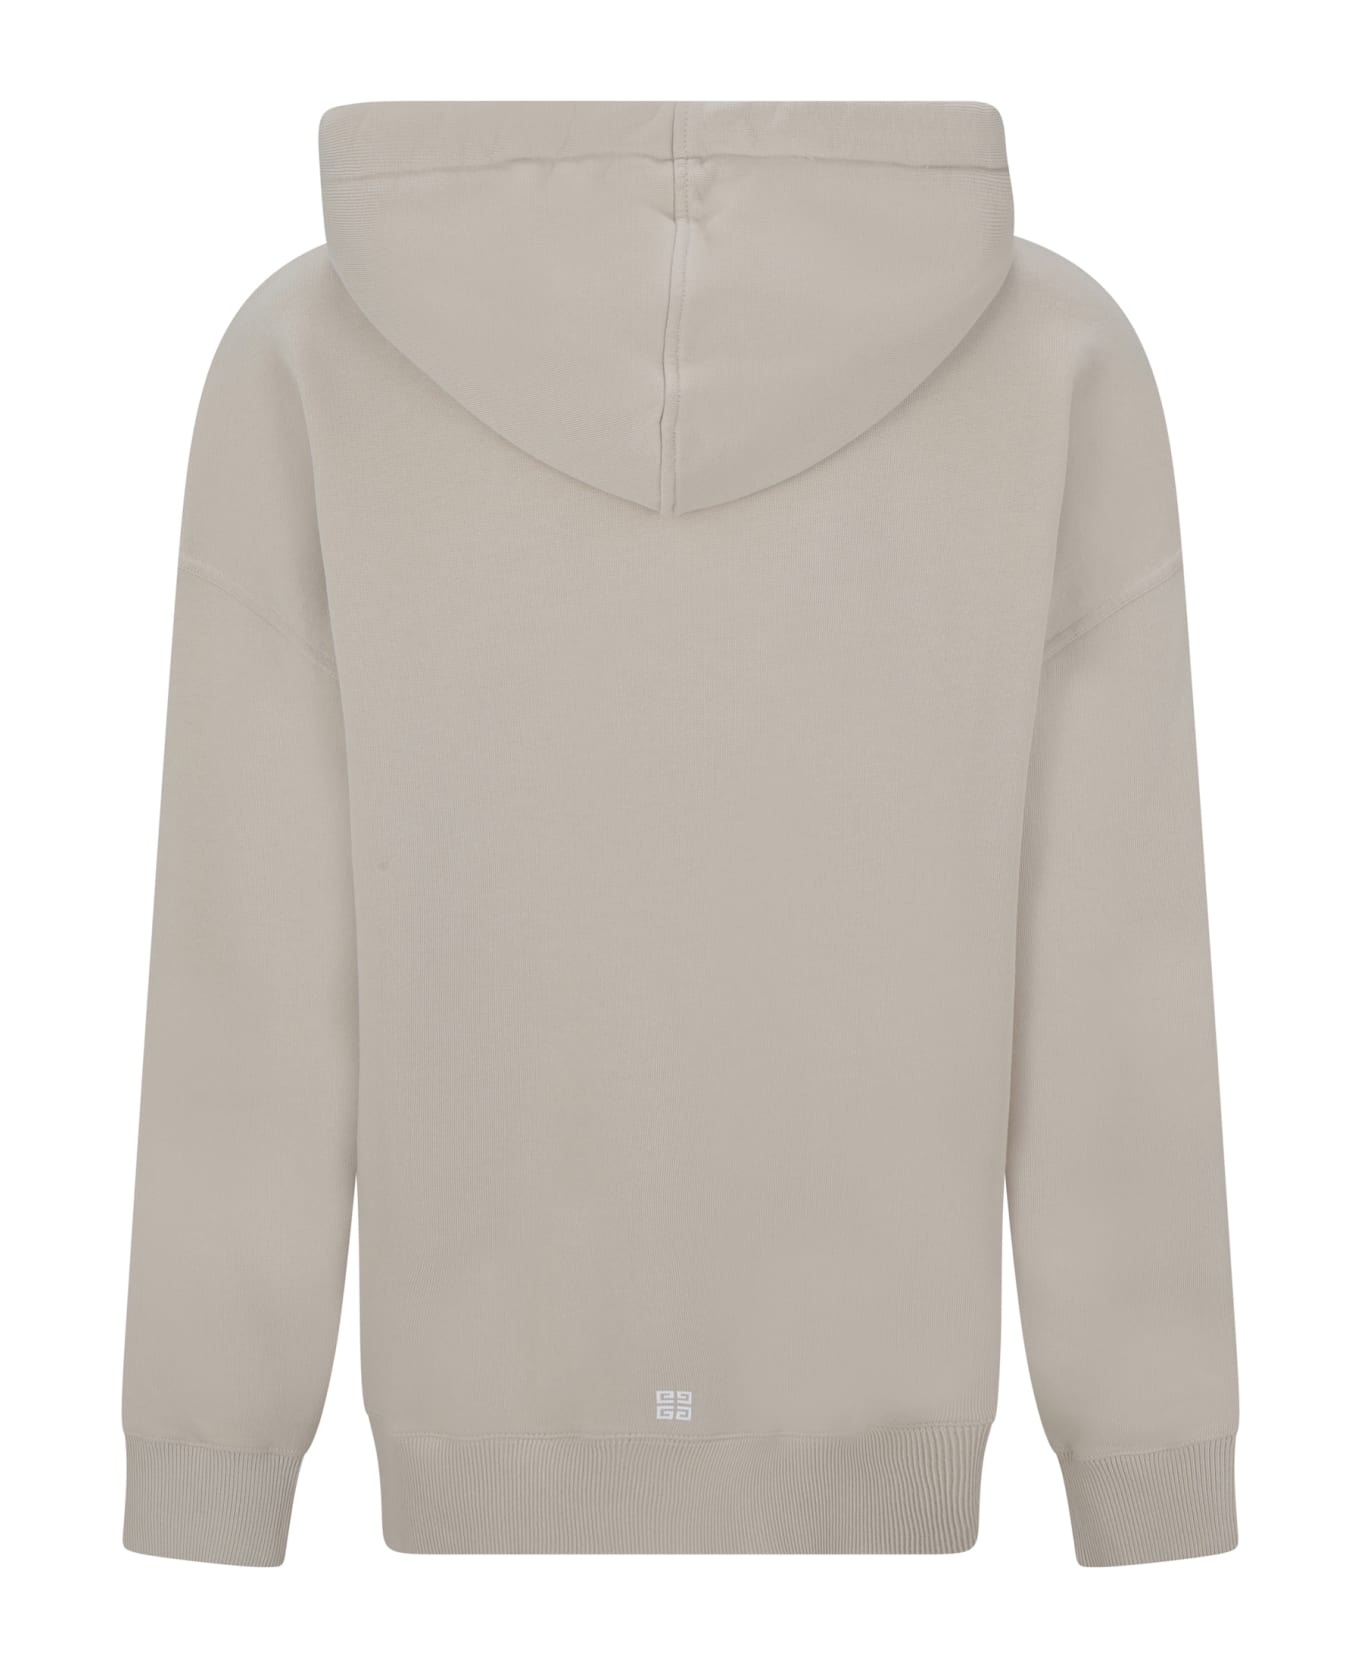 Givenchy Archetype Hoodie - Nude & Neutrals フリース